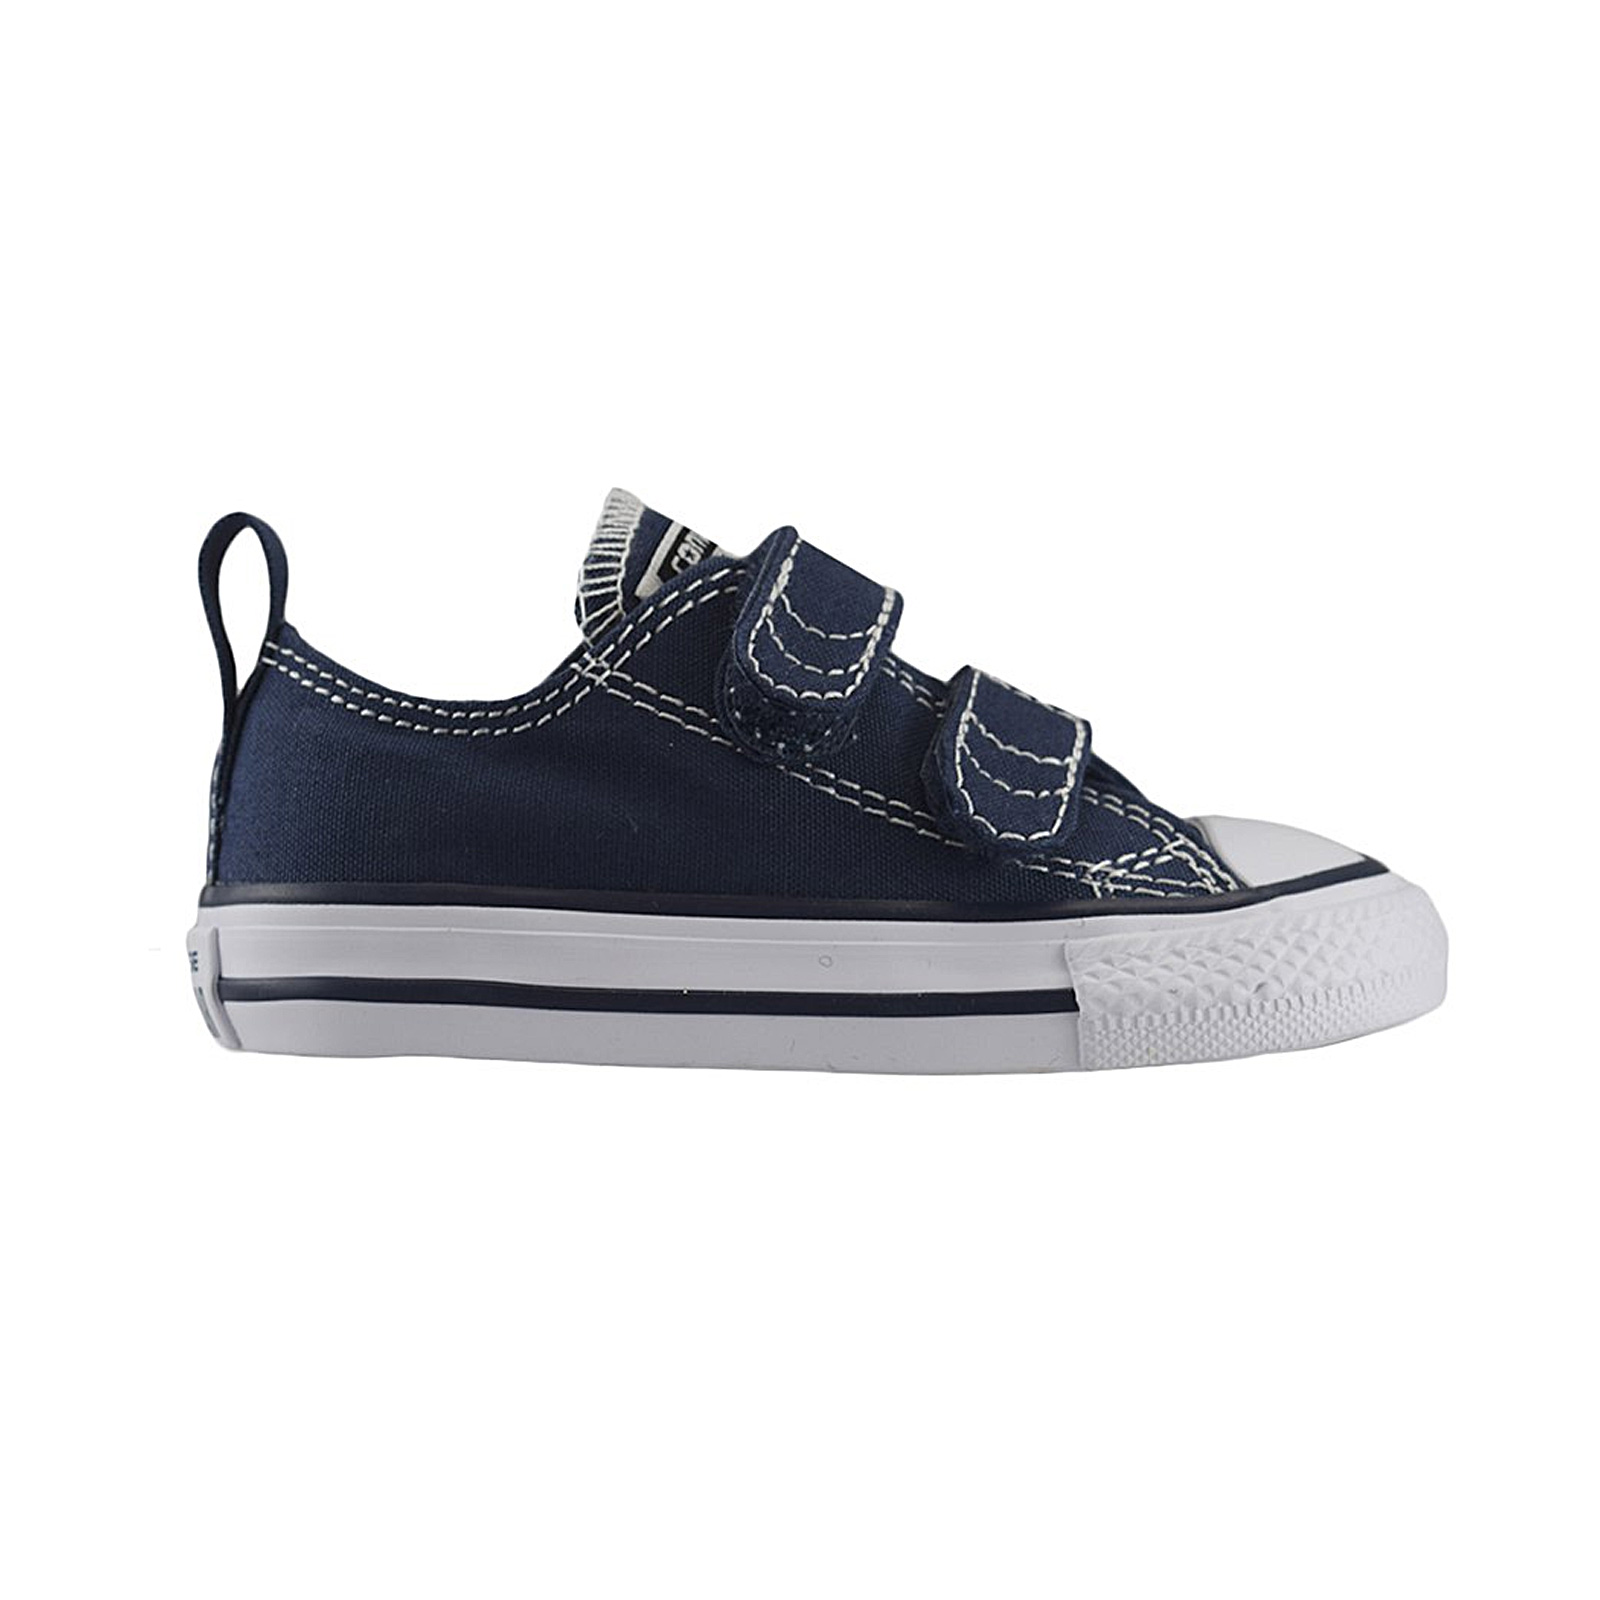 Converse - CHUCK TAYLOR ALL STAR 2V - 412-ATHLETIC NAVY/WHITE Παιδικά > Παπούτσια > Sneaker > Παπούτσι Mid Cut